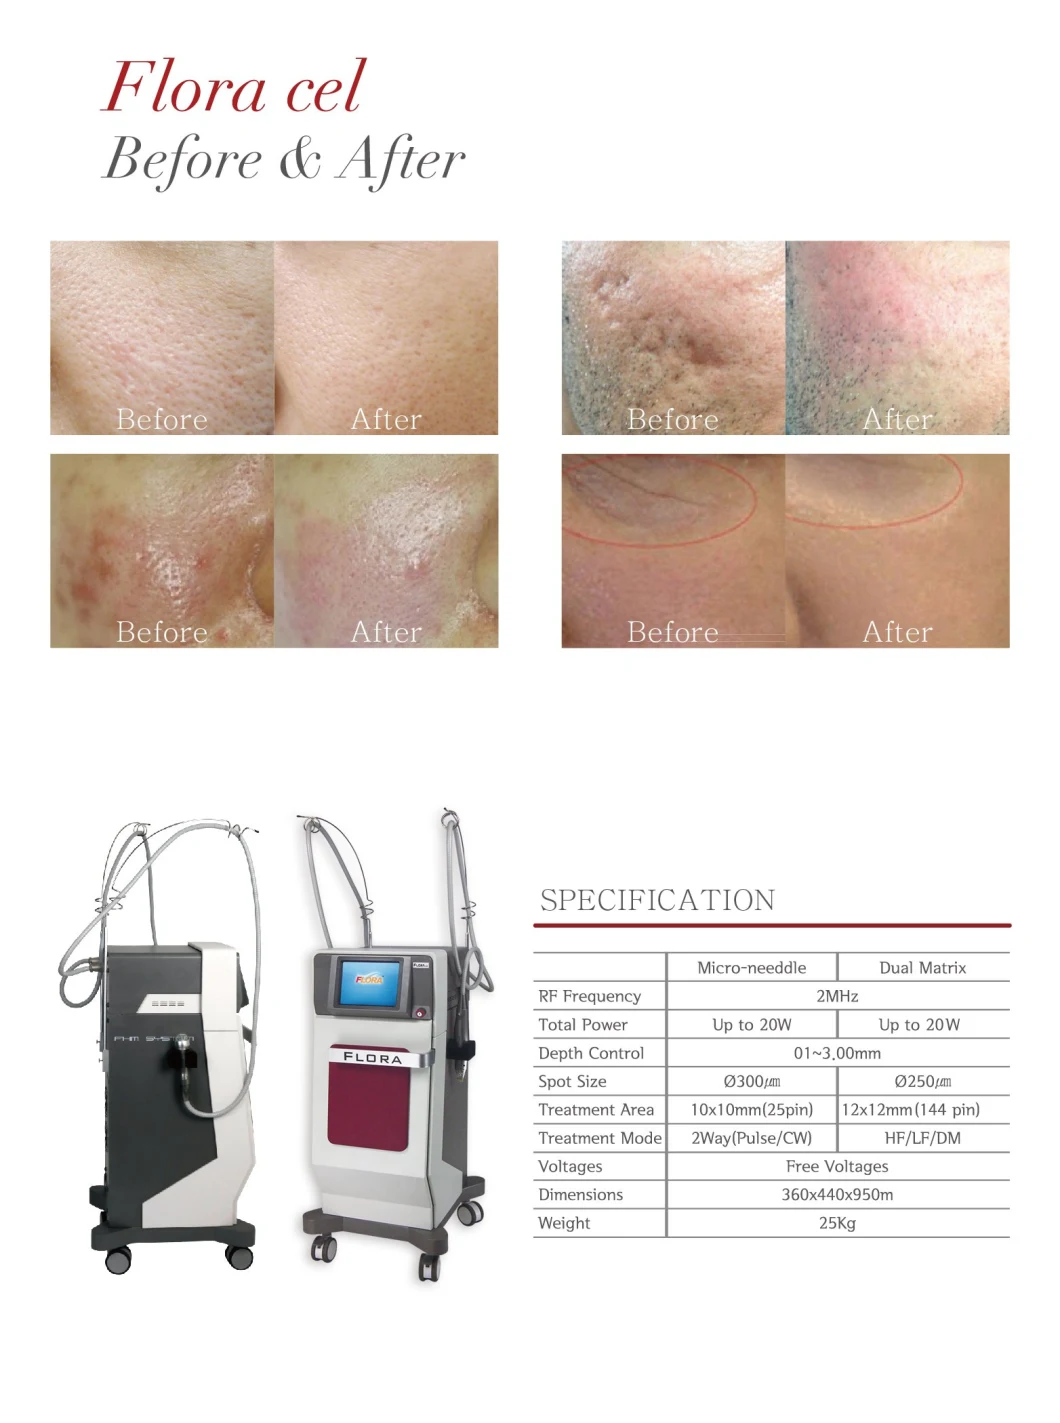 More Safety RF Needle Beauty Salon Machine for Anti Aging with Kfda Certificate